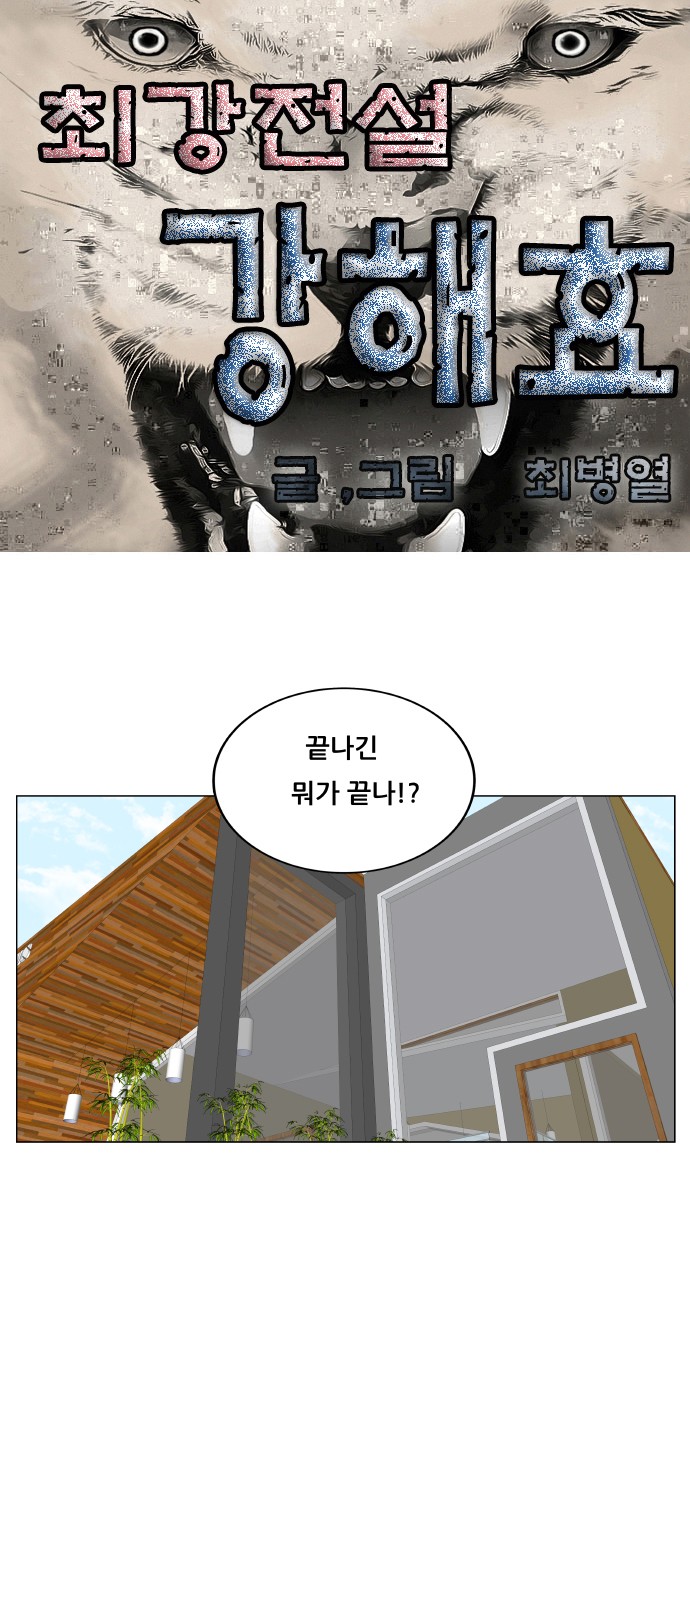 Ultimate Legend - Kang Hae Hyo - Chapter 341 - Page 1